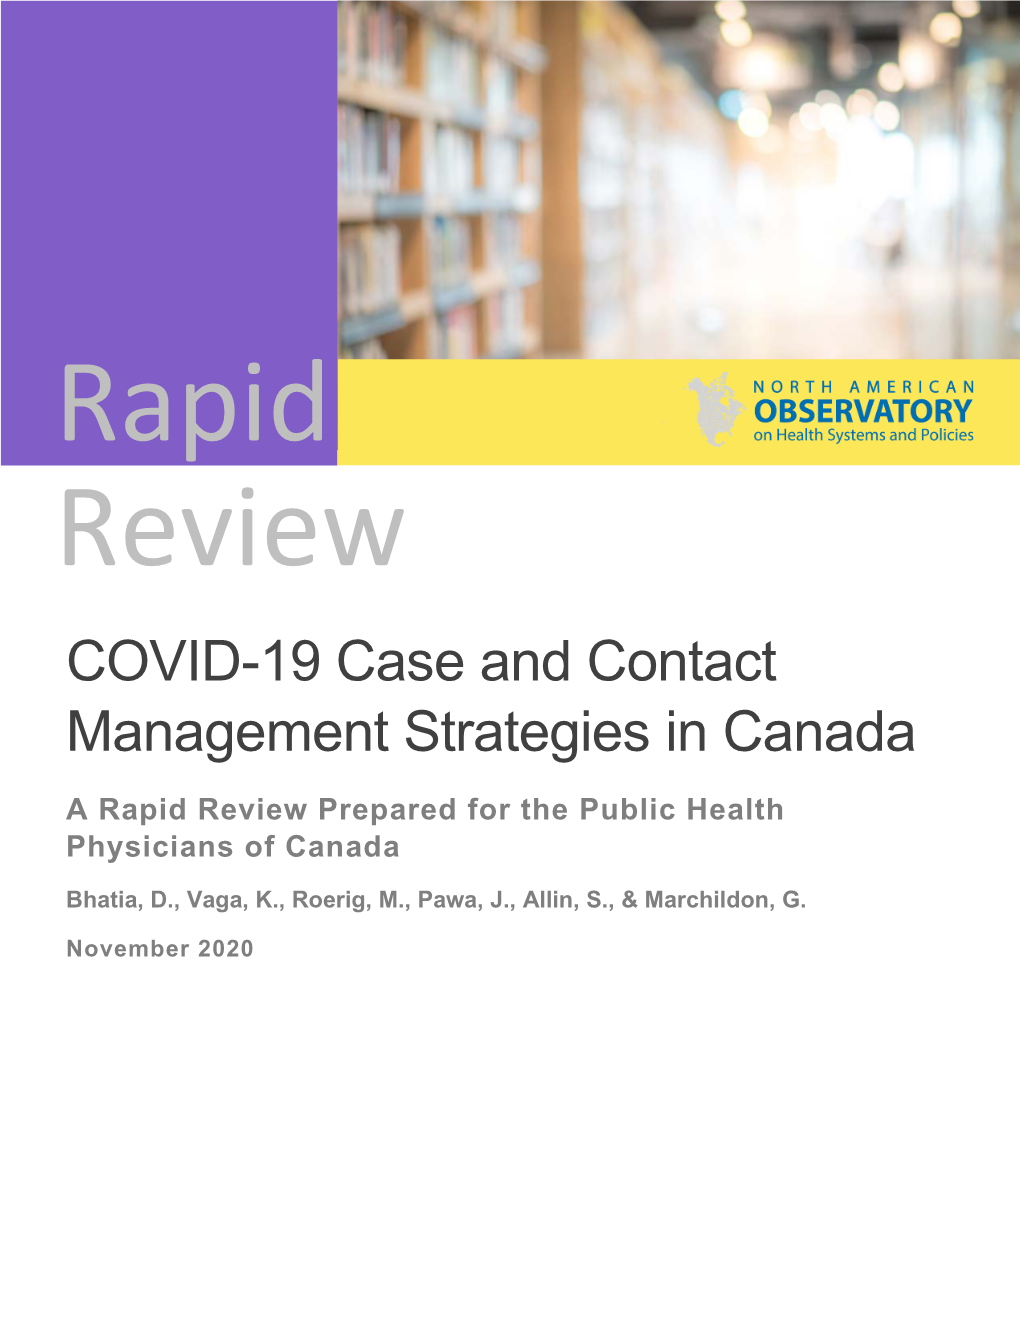 COVID-19 Case and Contact Management Strategies in Canada